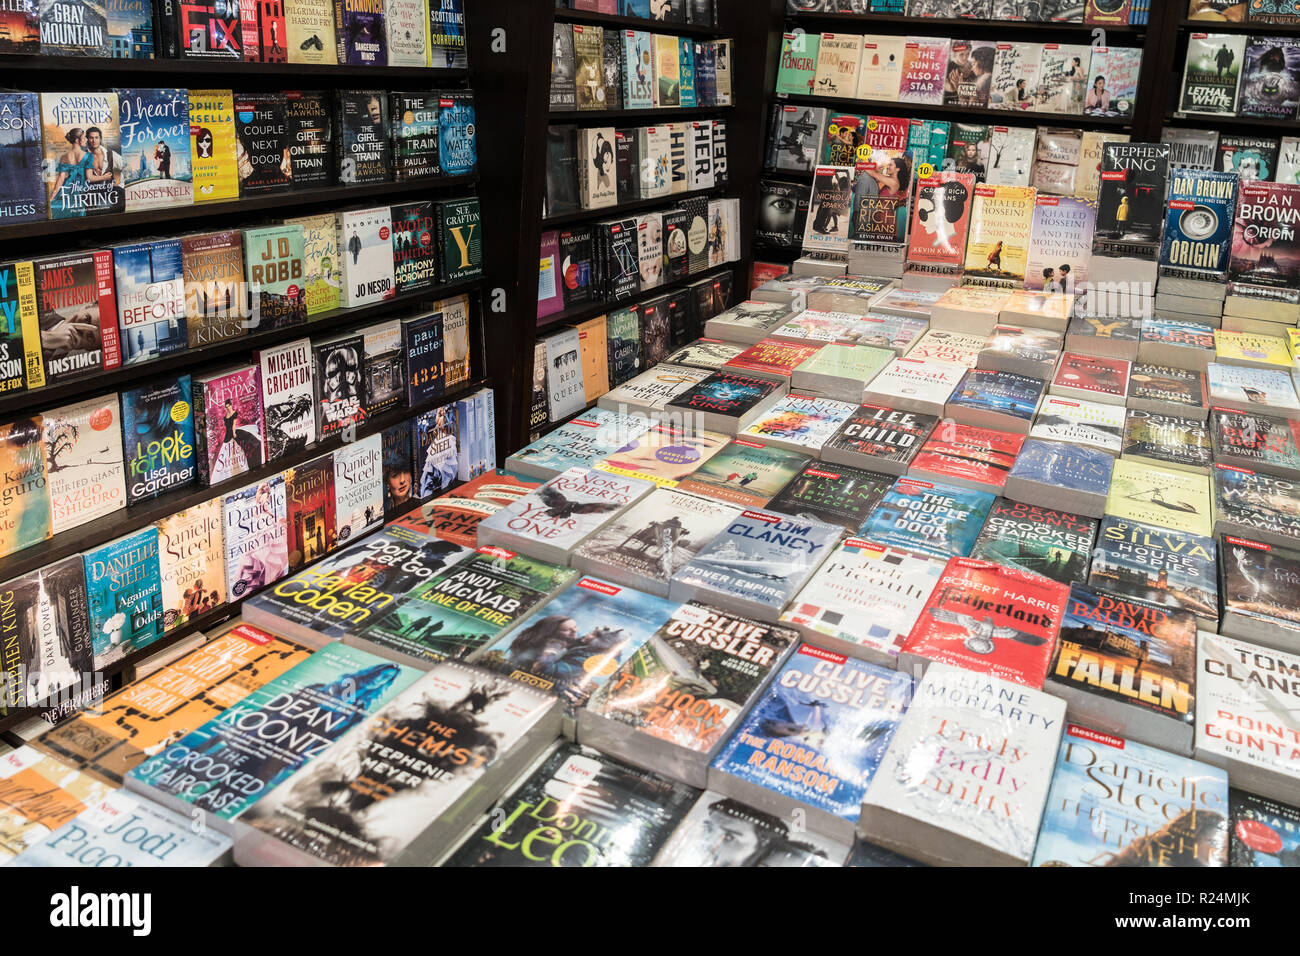 Jakarta, Indonesia - November 13 2018: Various paperback novels displayed in a modern bookstore. Stock Photo